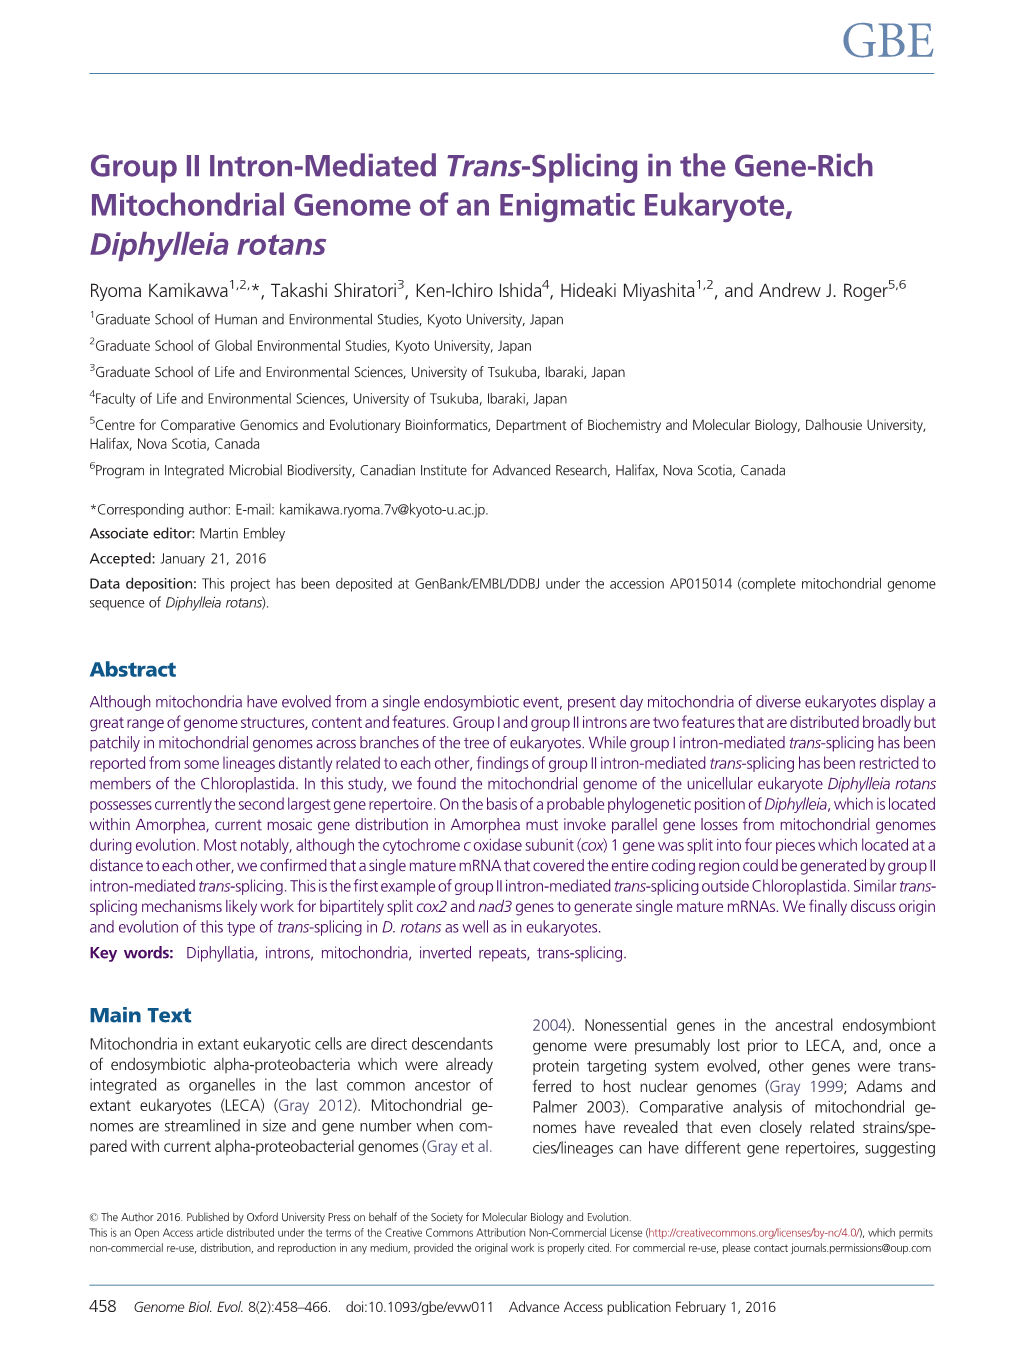 Group II Intron-Mediated Trans-Splicing in the Gene-Rich Mitochondrial Genome of an Enigmatic Eukaryote, Diphylleia Rotans